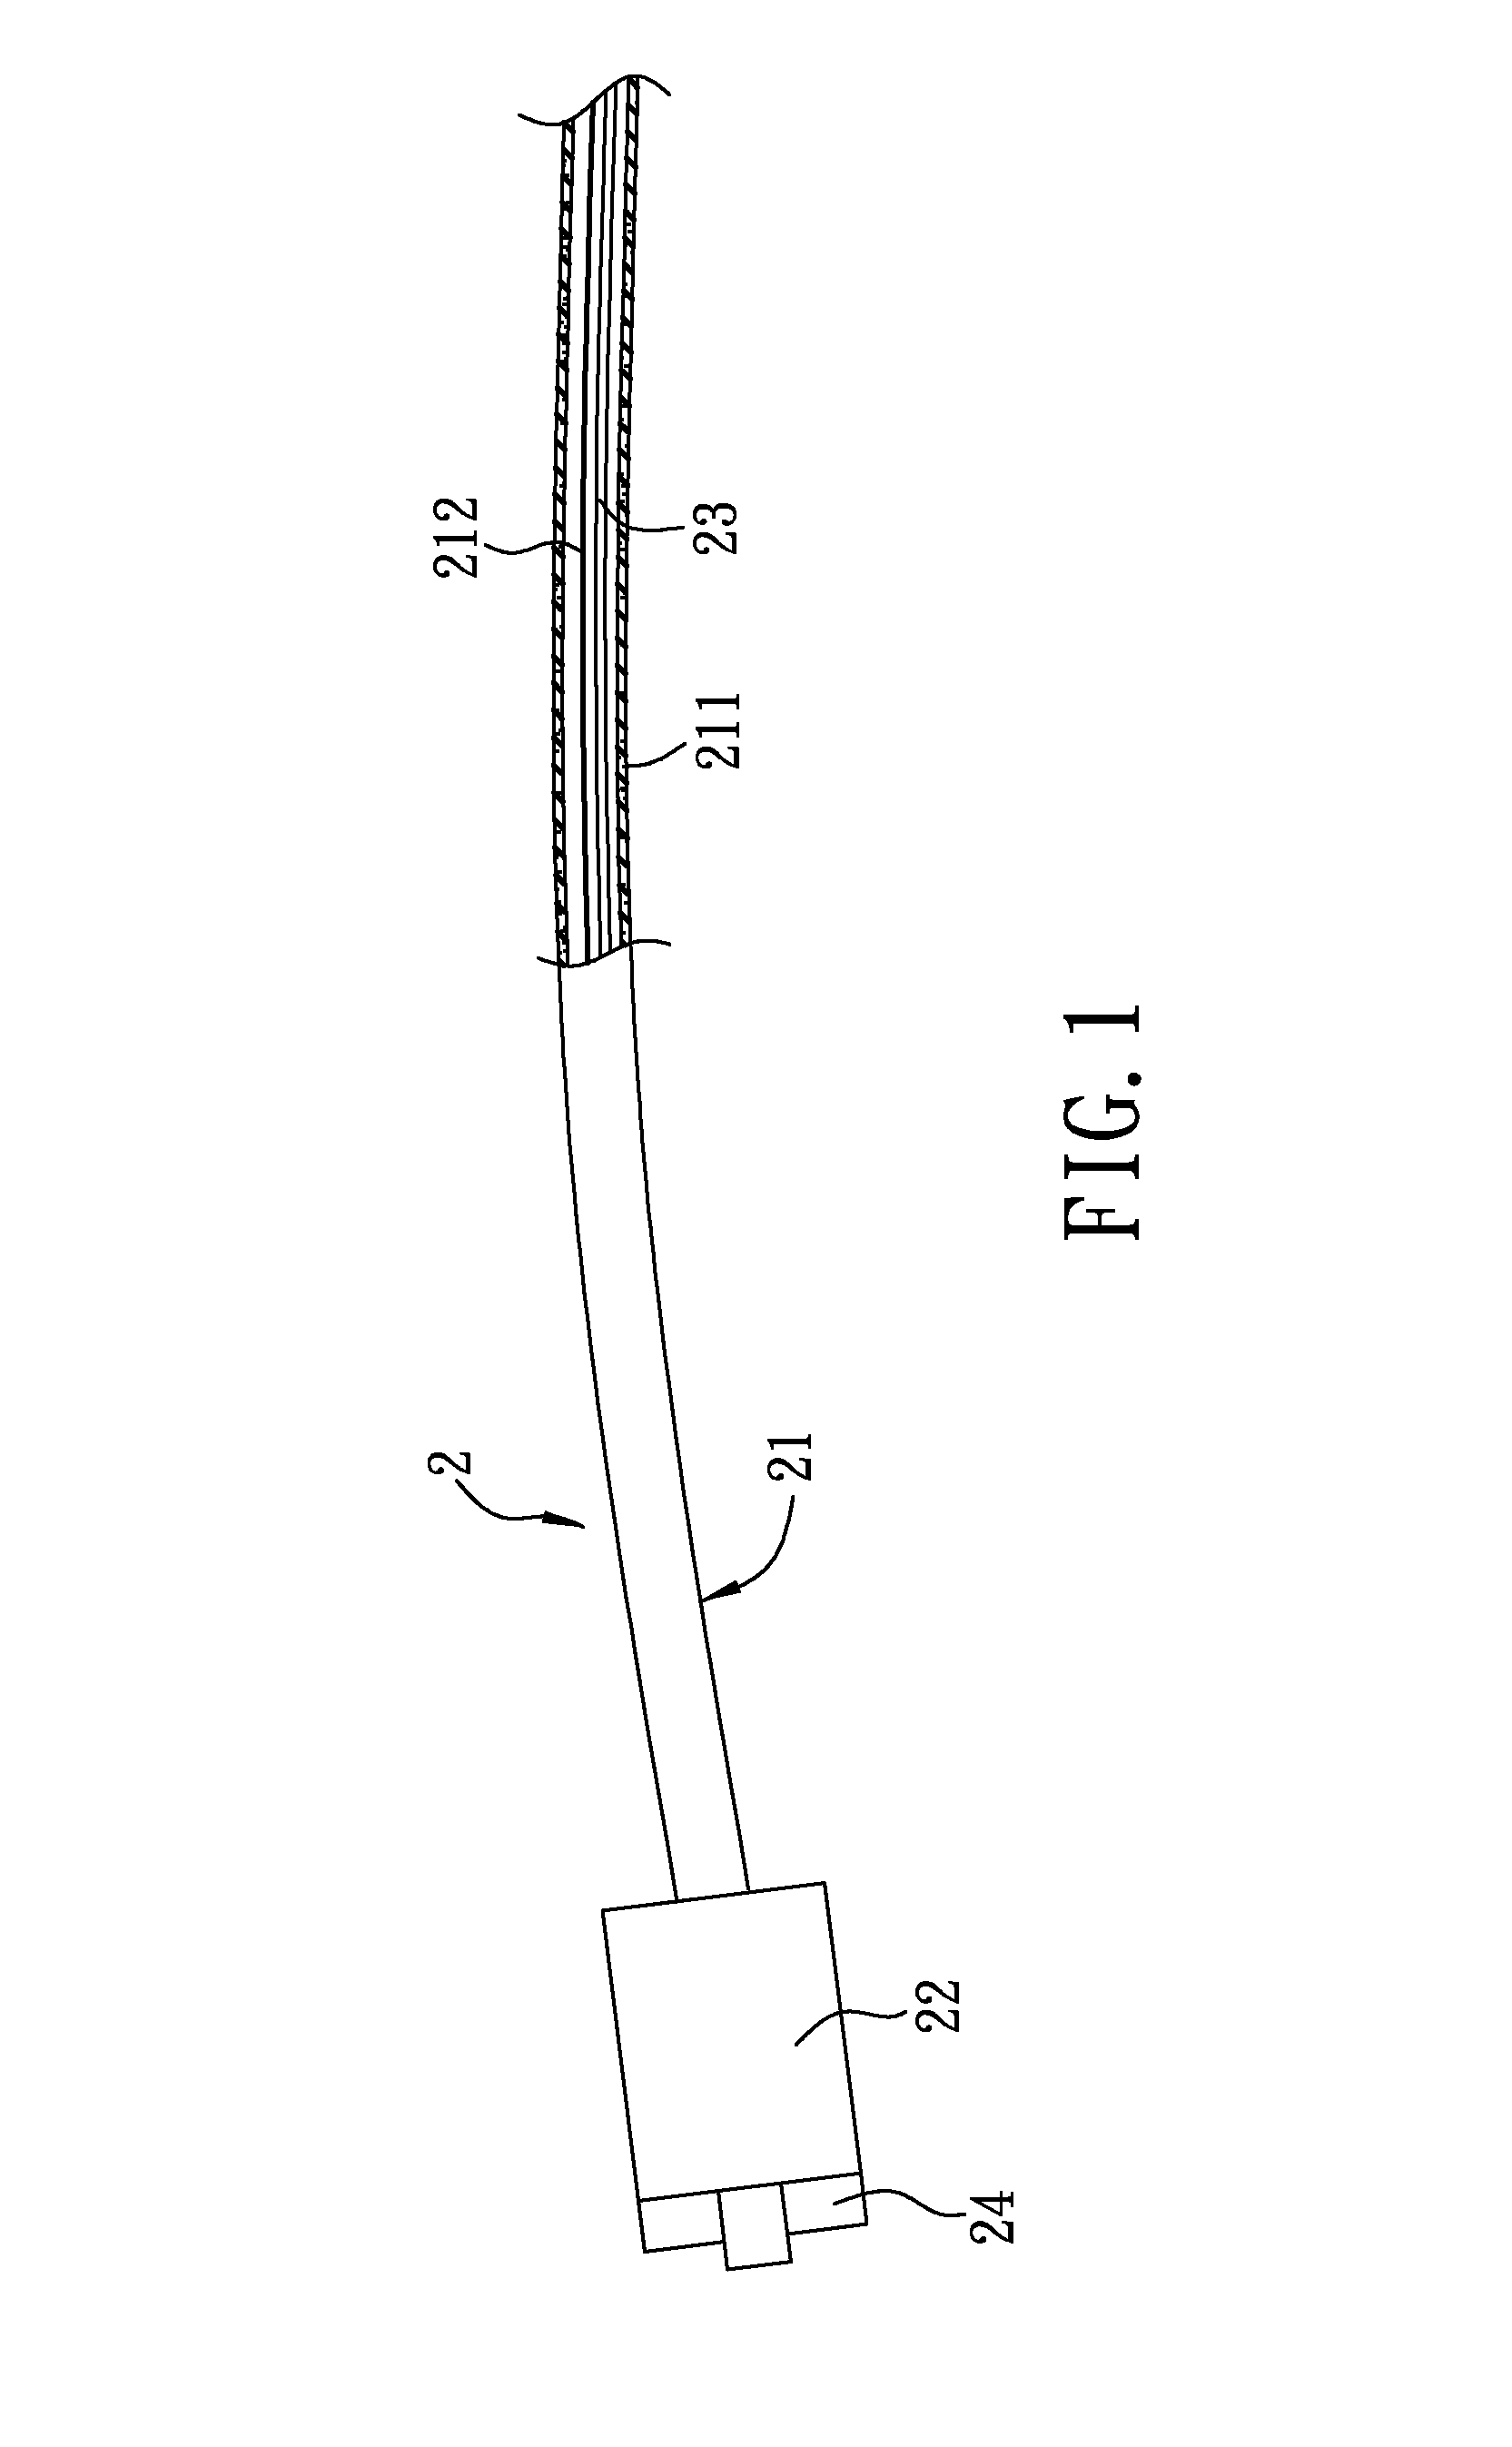 Combined retractor and endoscope system